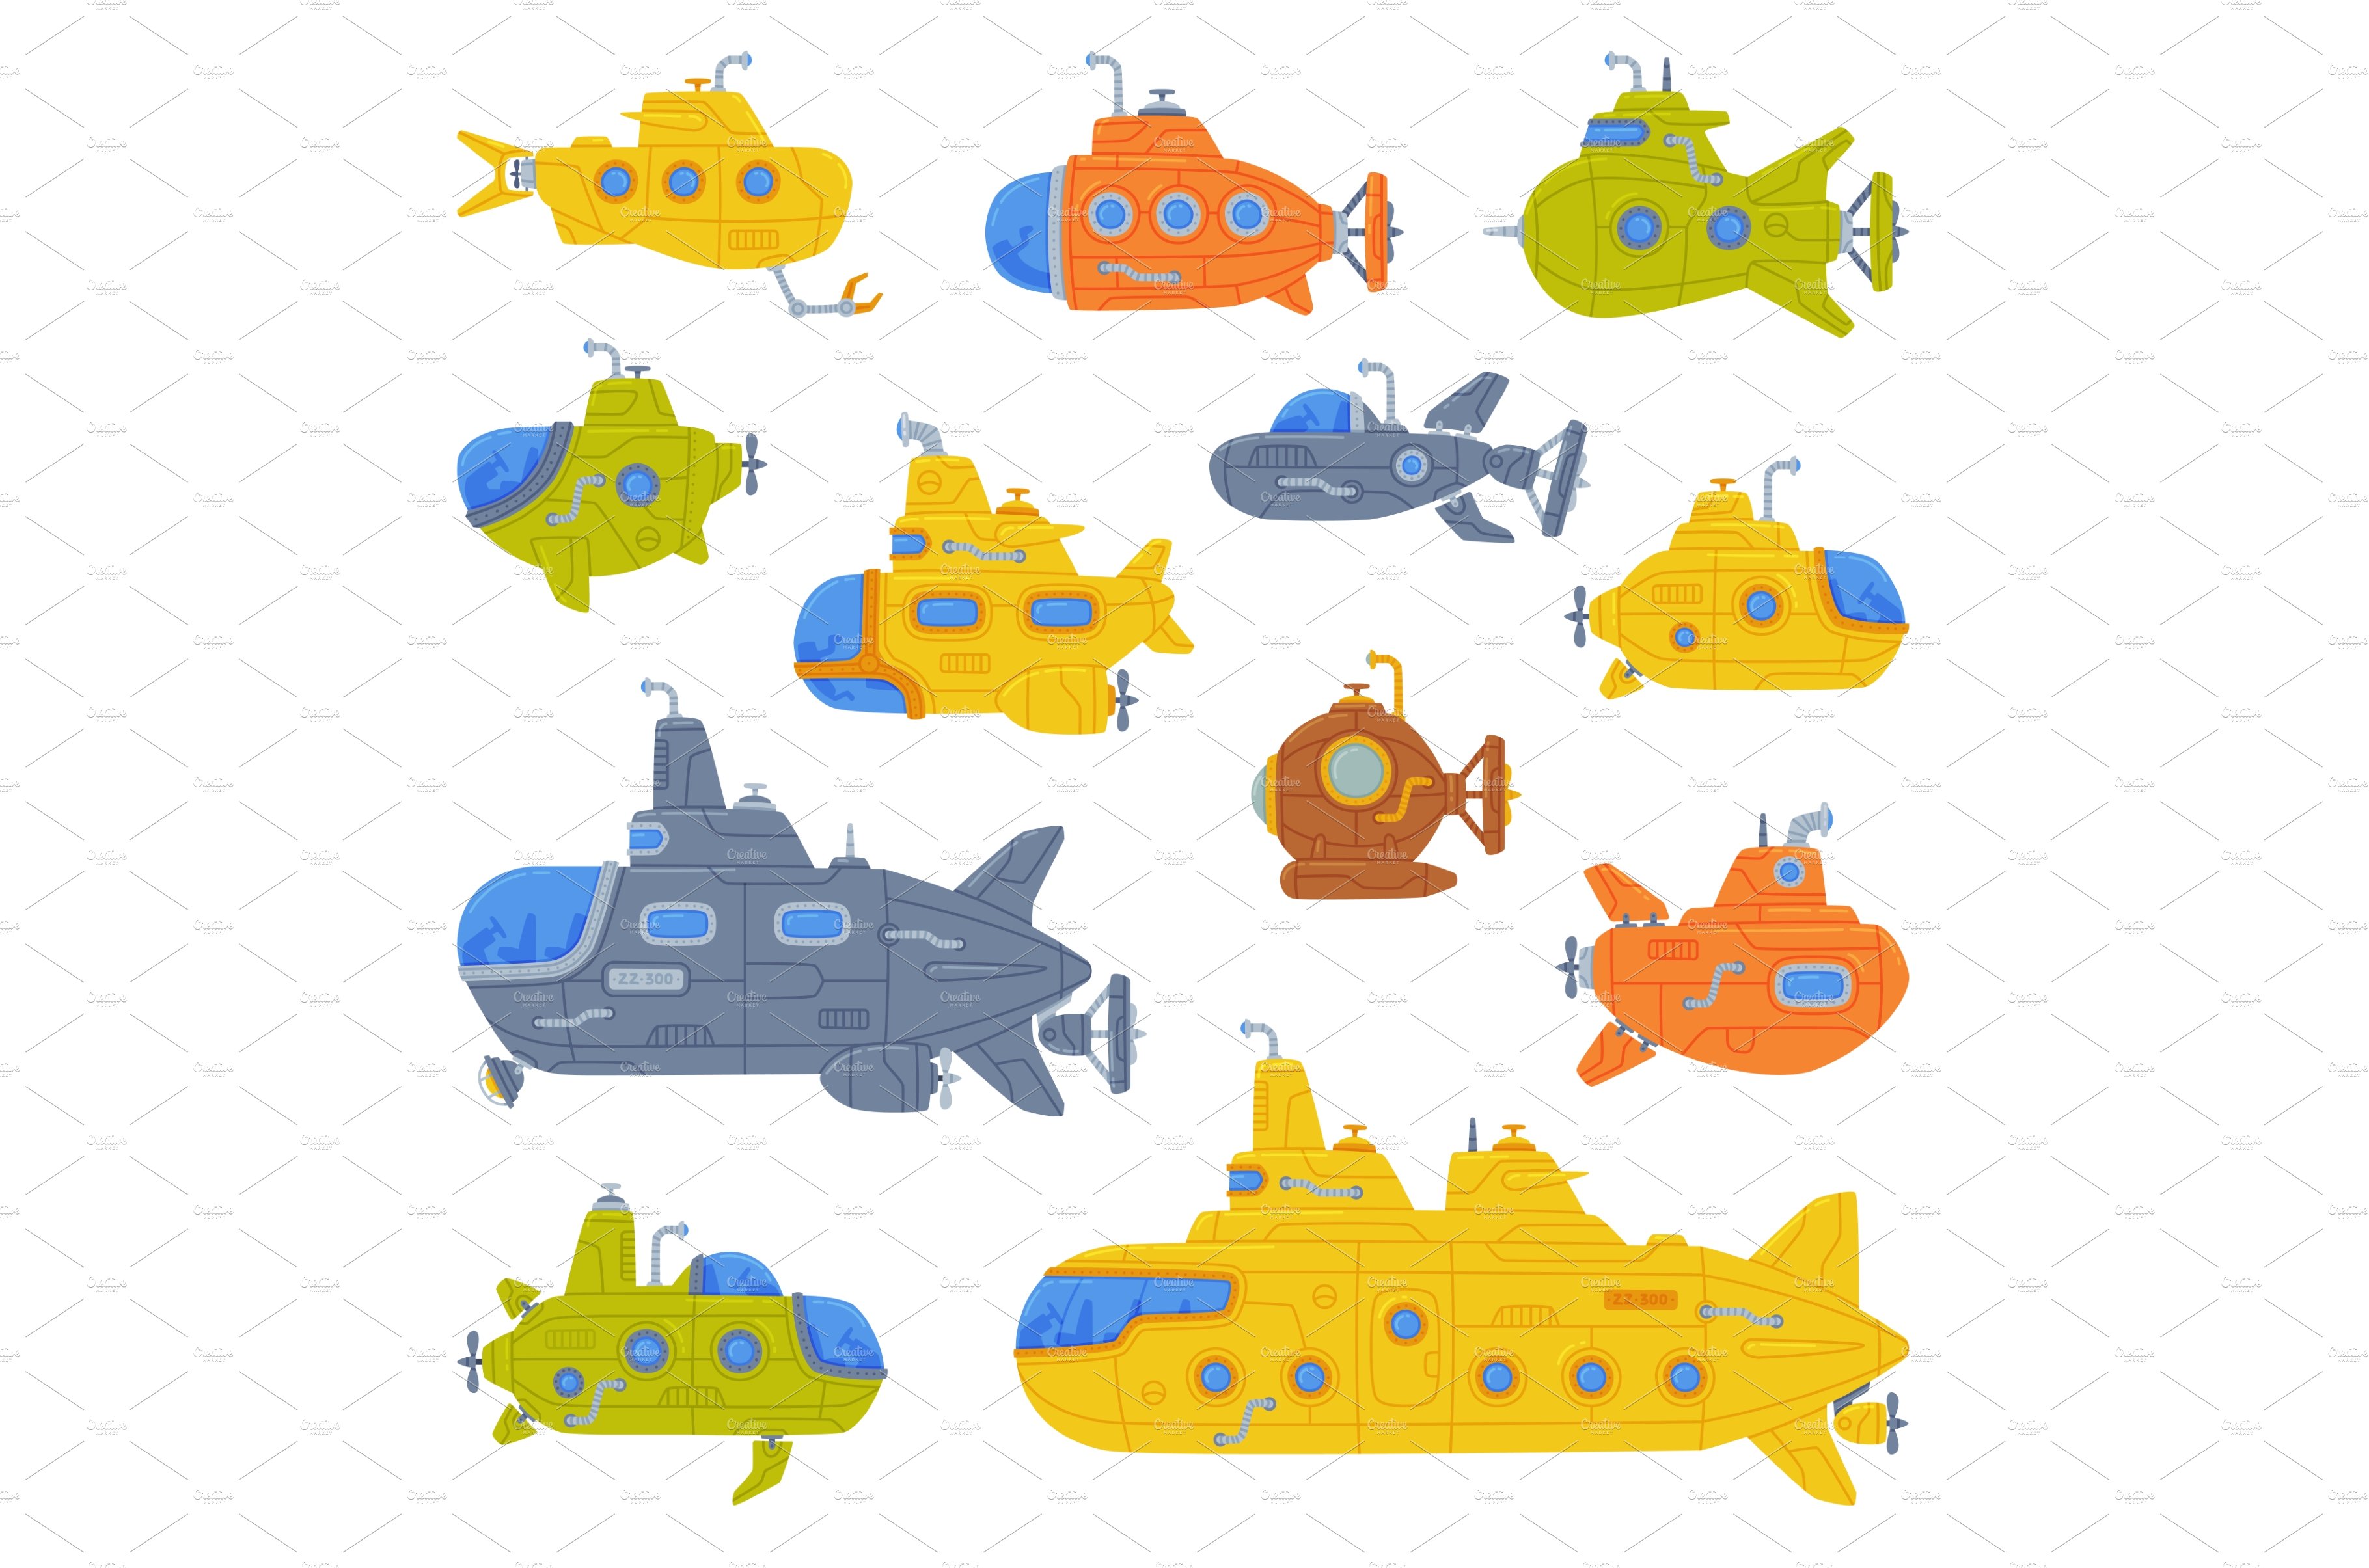 Colorful Submarine Watercraft cover image.